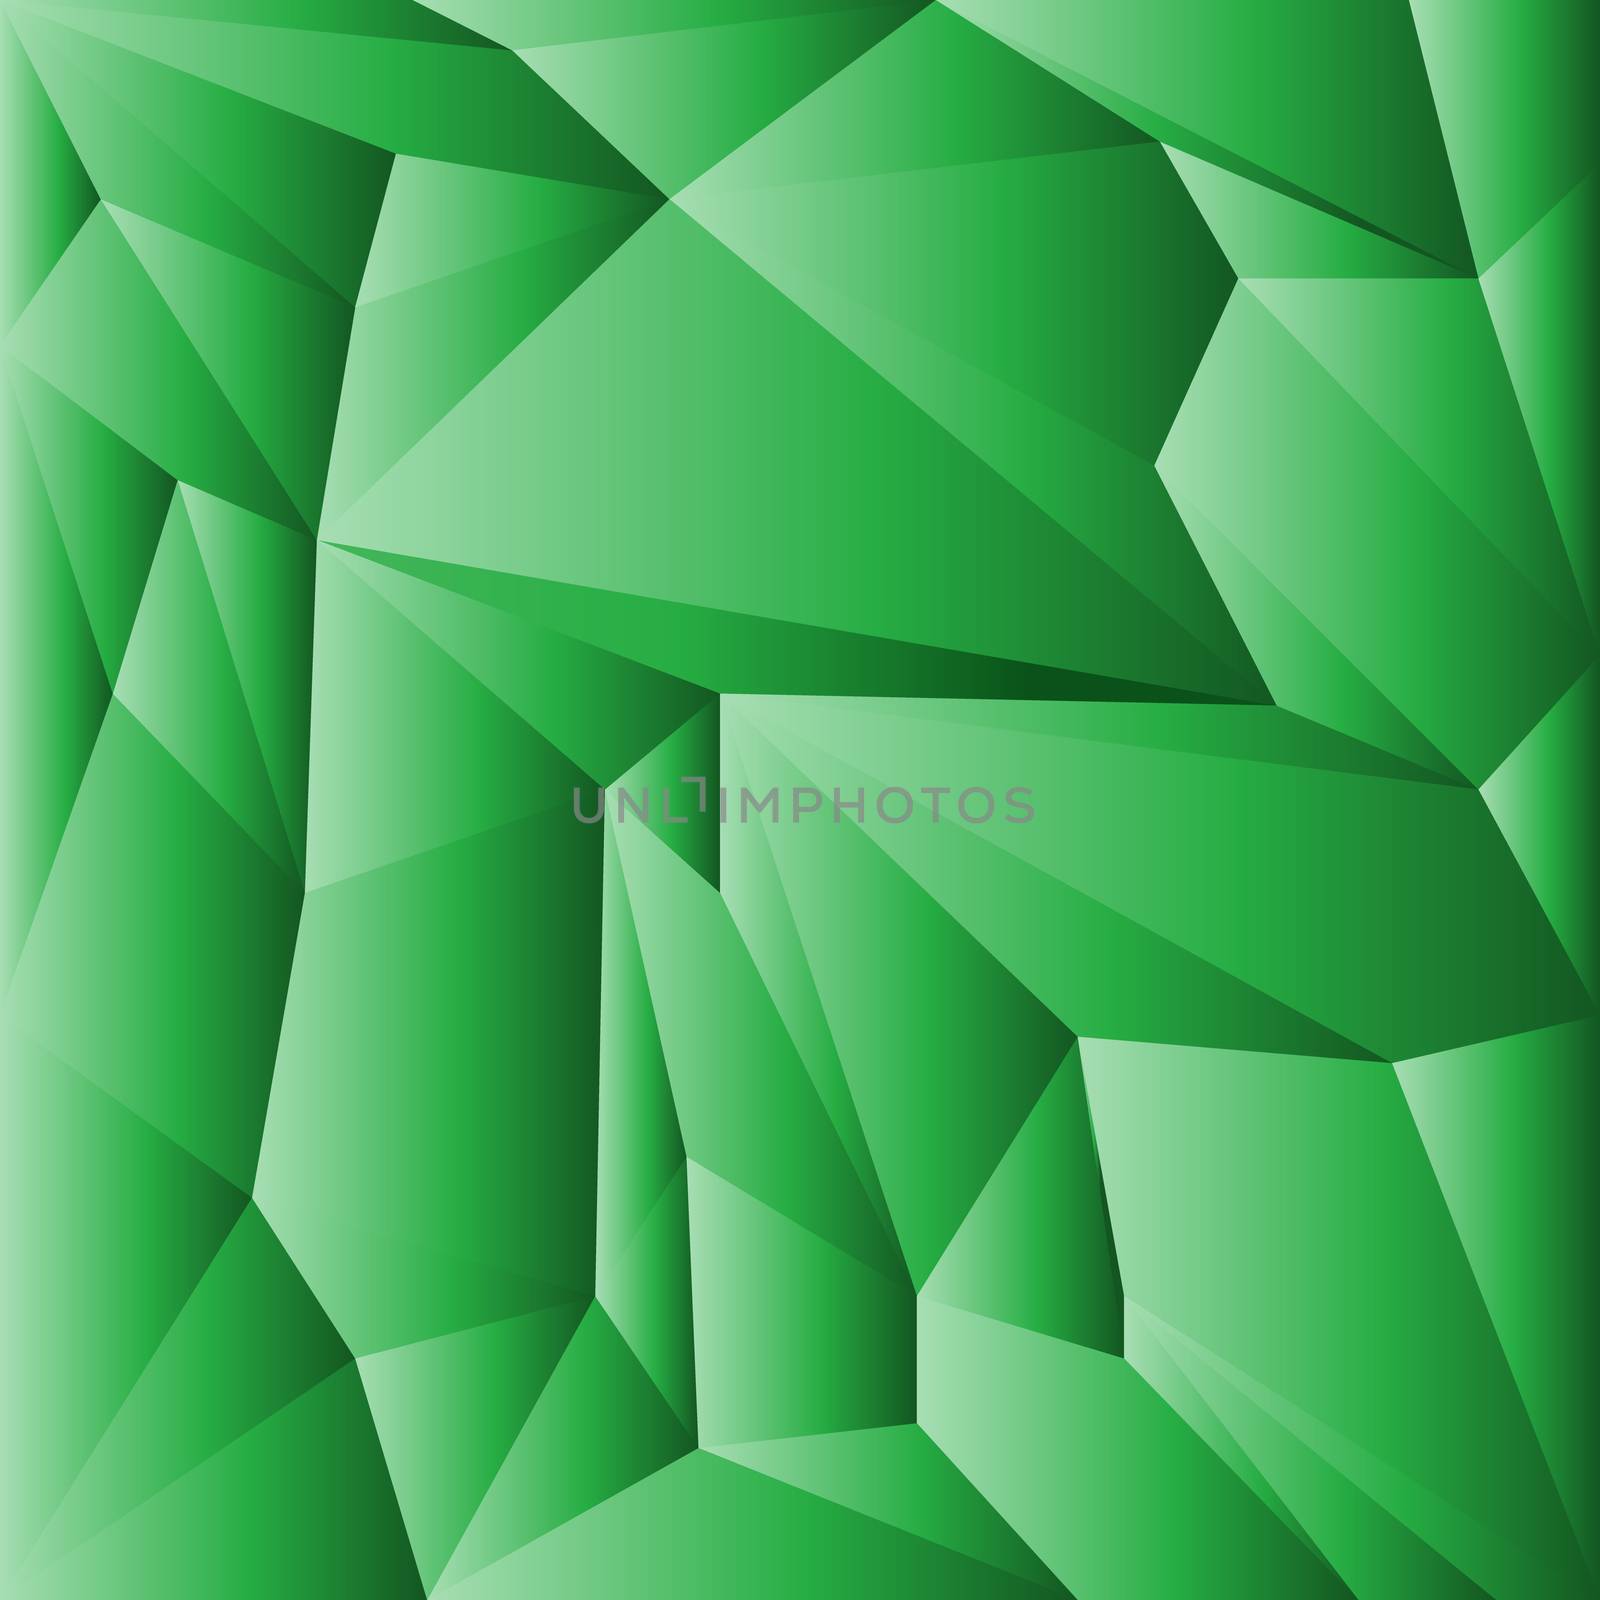 abstract geometric rumpled triangular low poly style vector illustration graphic background by eskimos